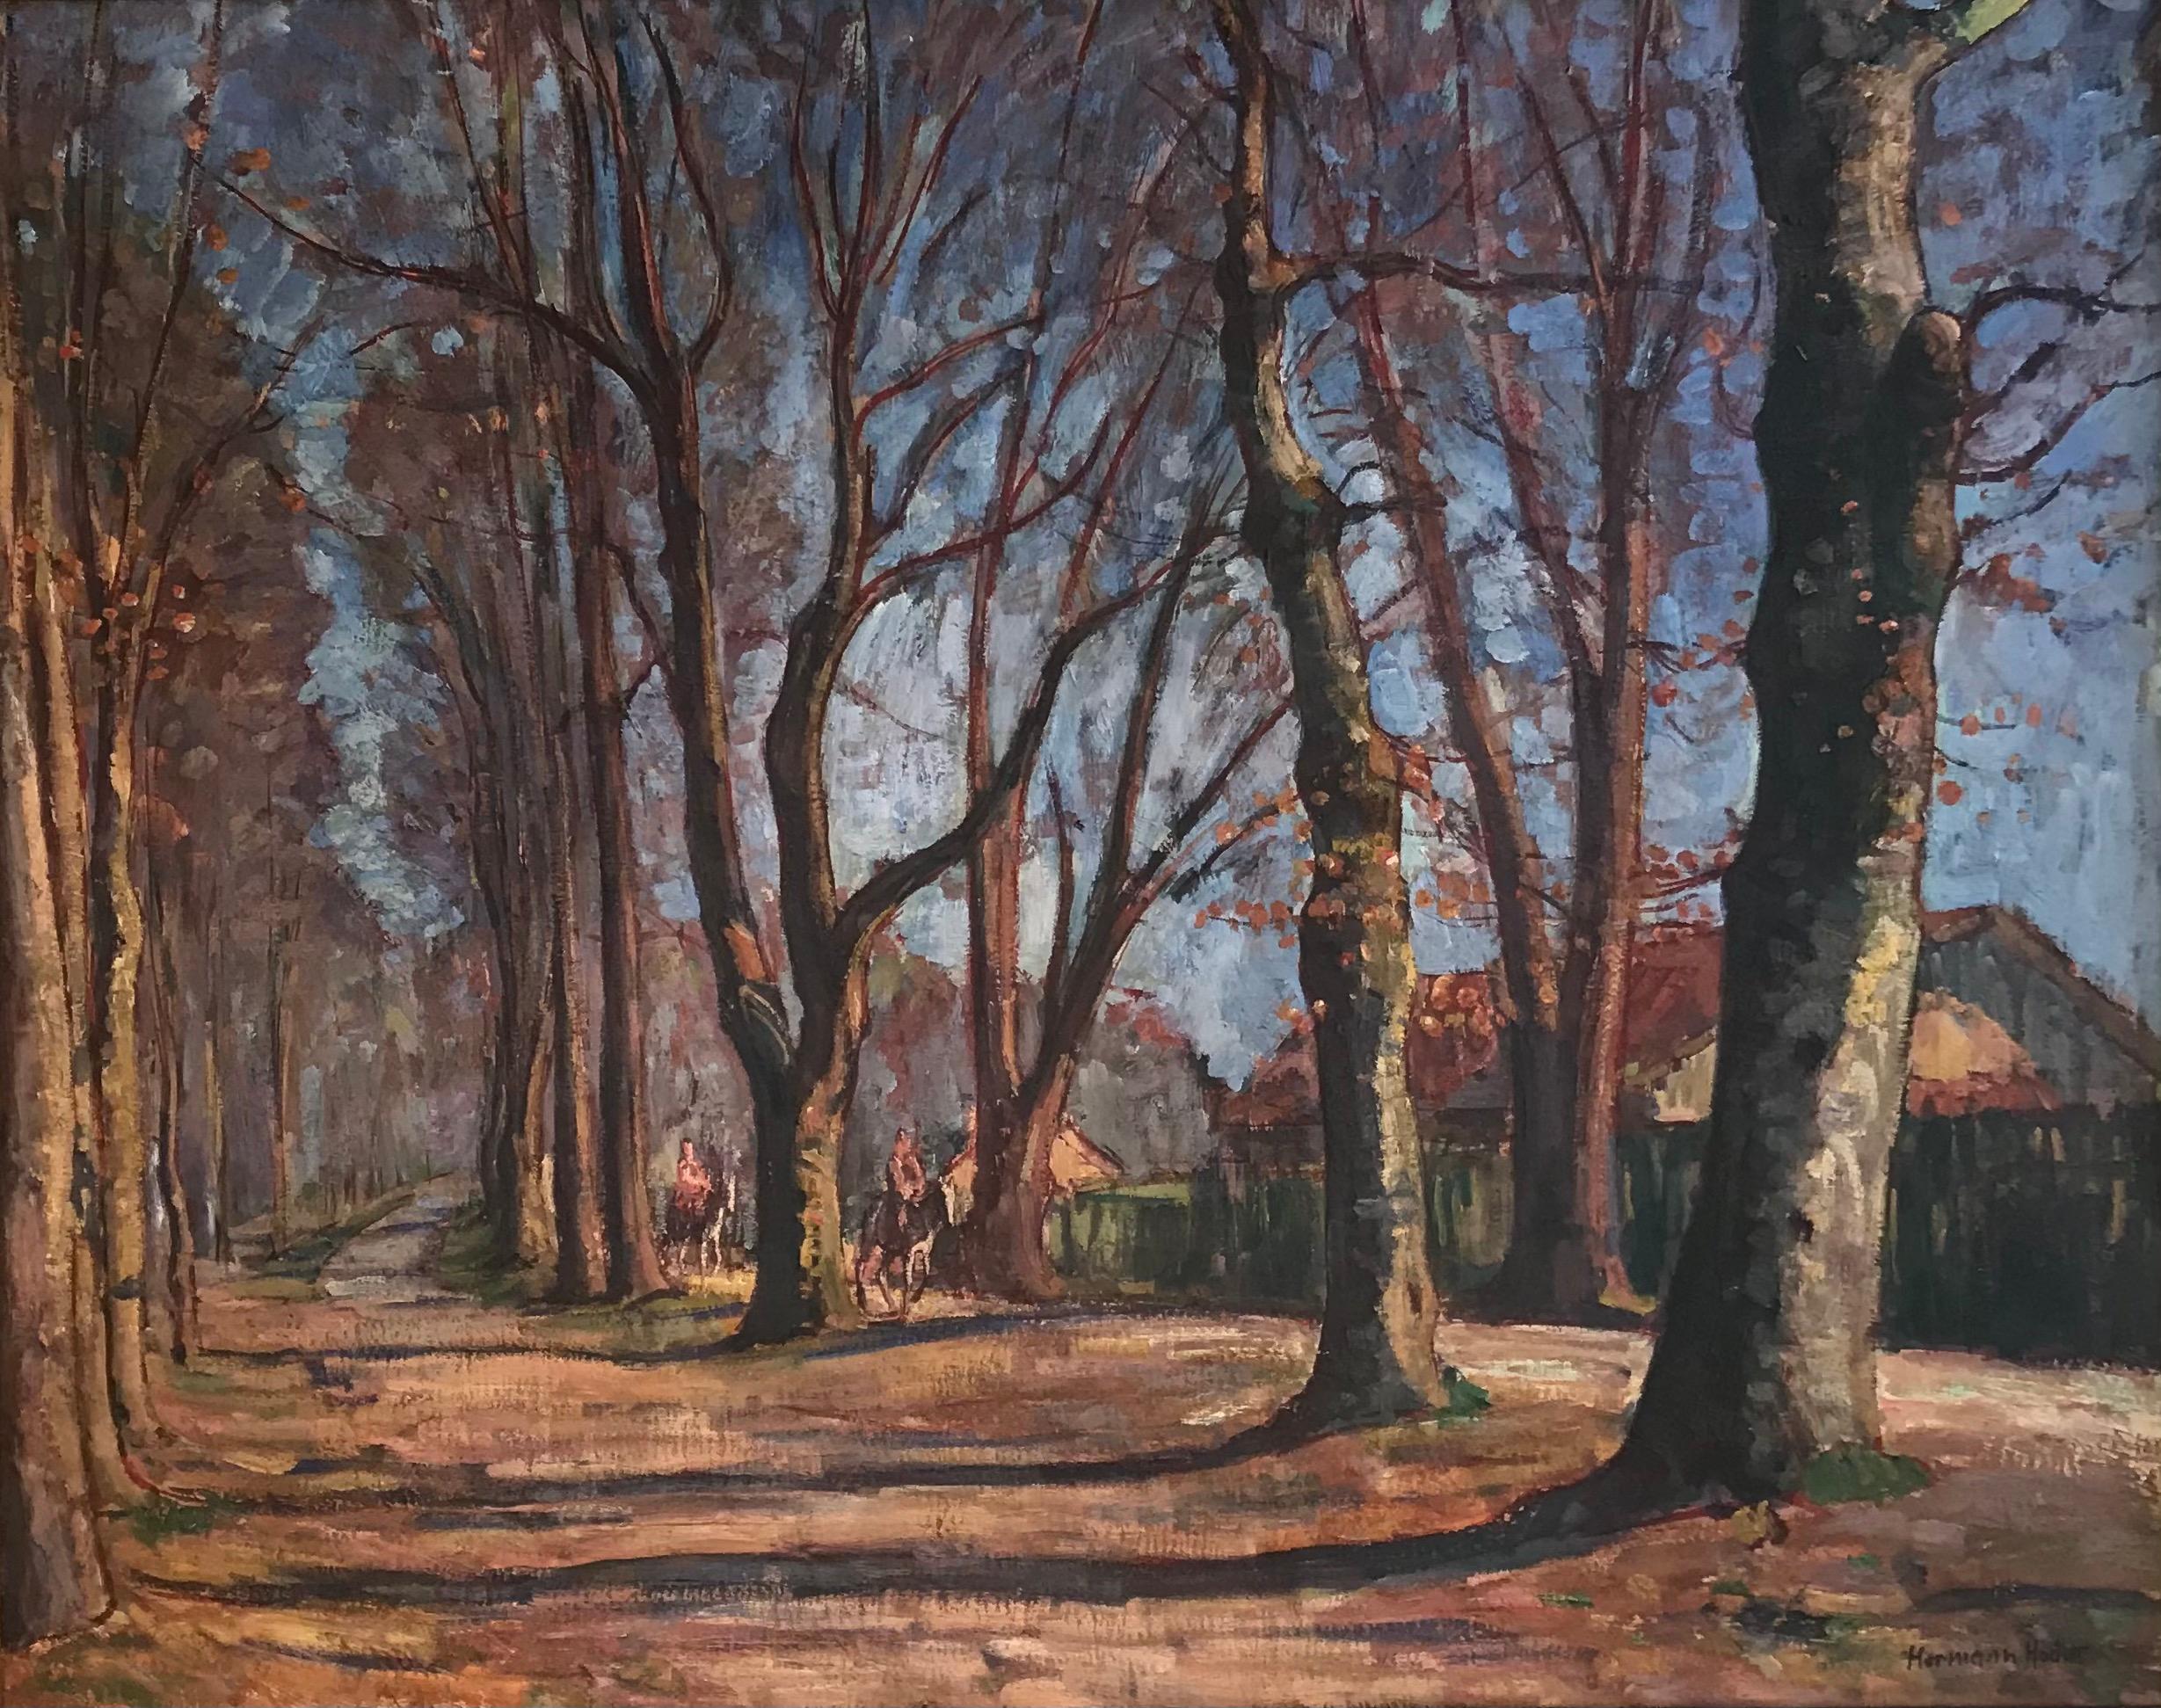 "Walk in the forest risière" by Hermann Holder - Oil on canvas